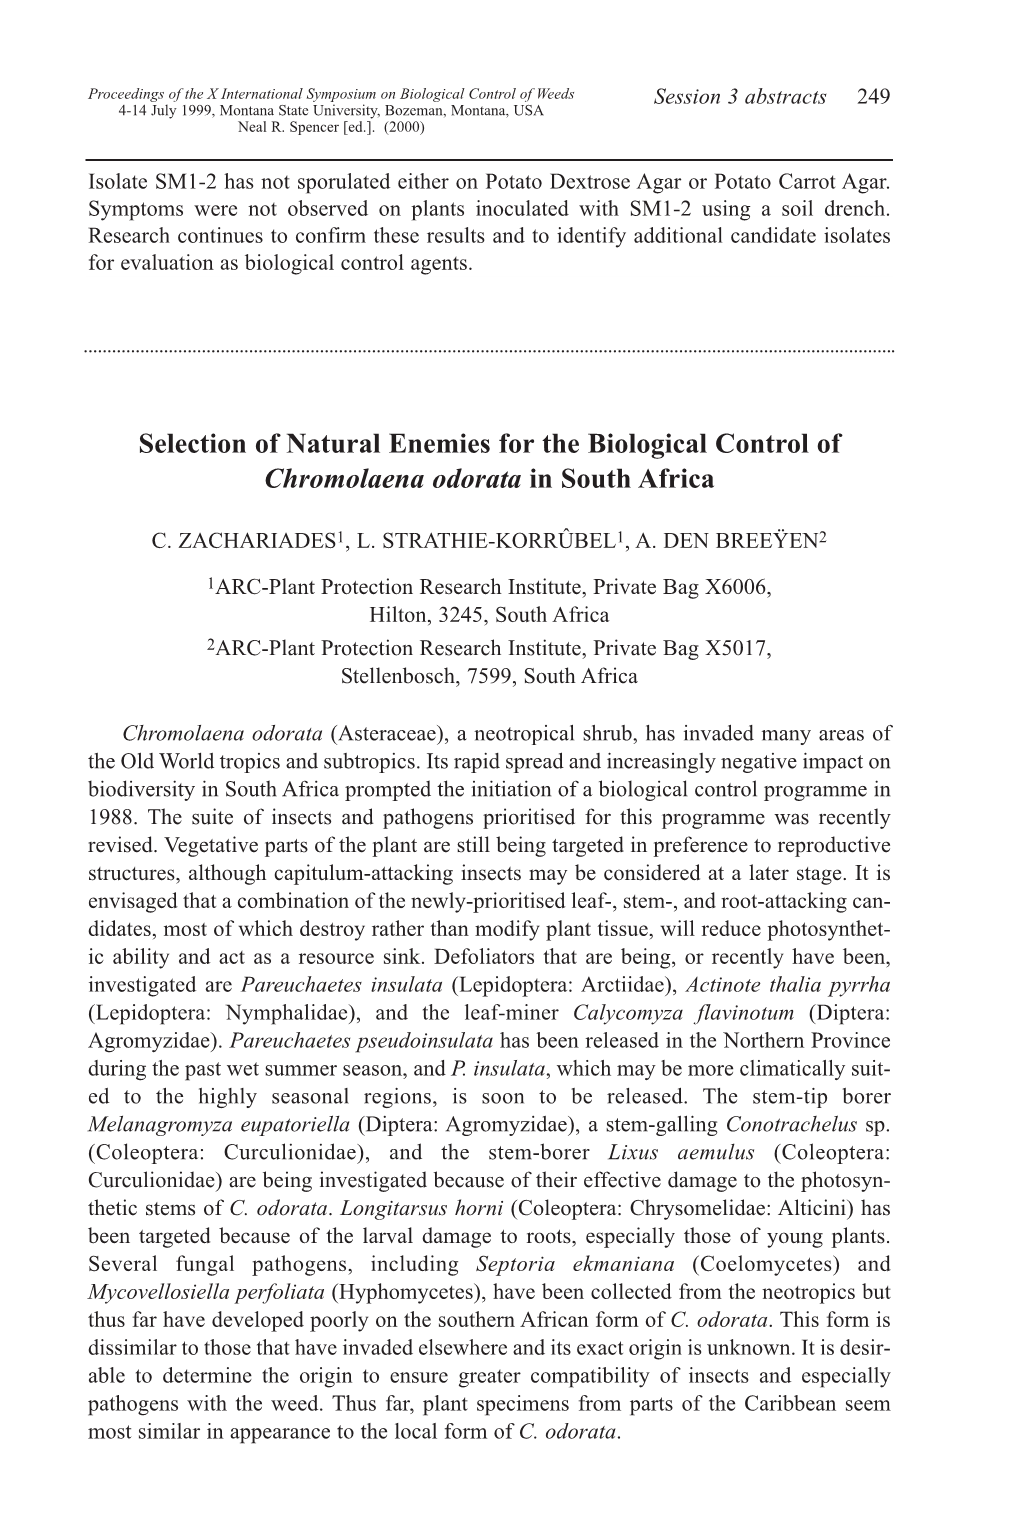 Selection of Natural Enemies for the Biological Control of Chromolaena Odorata in South Africa